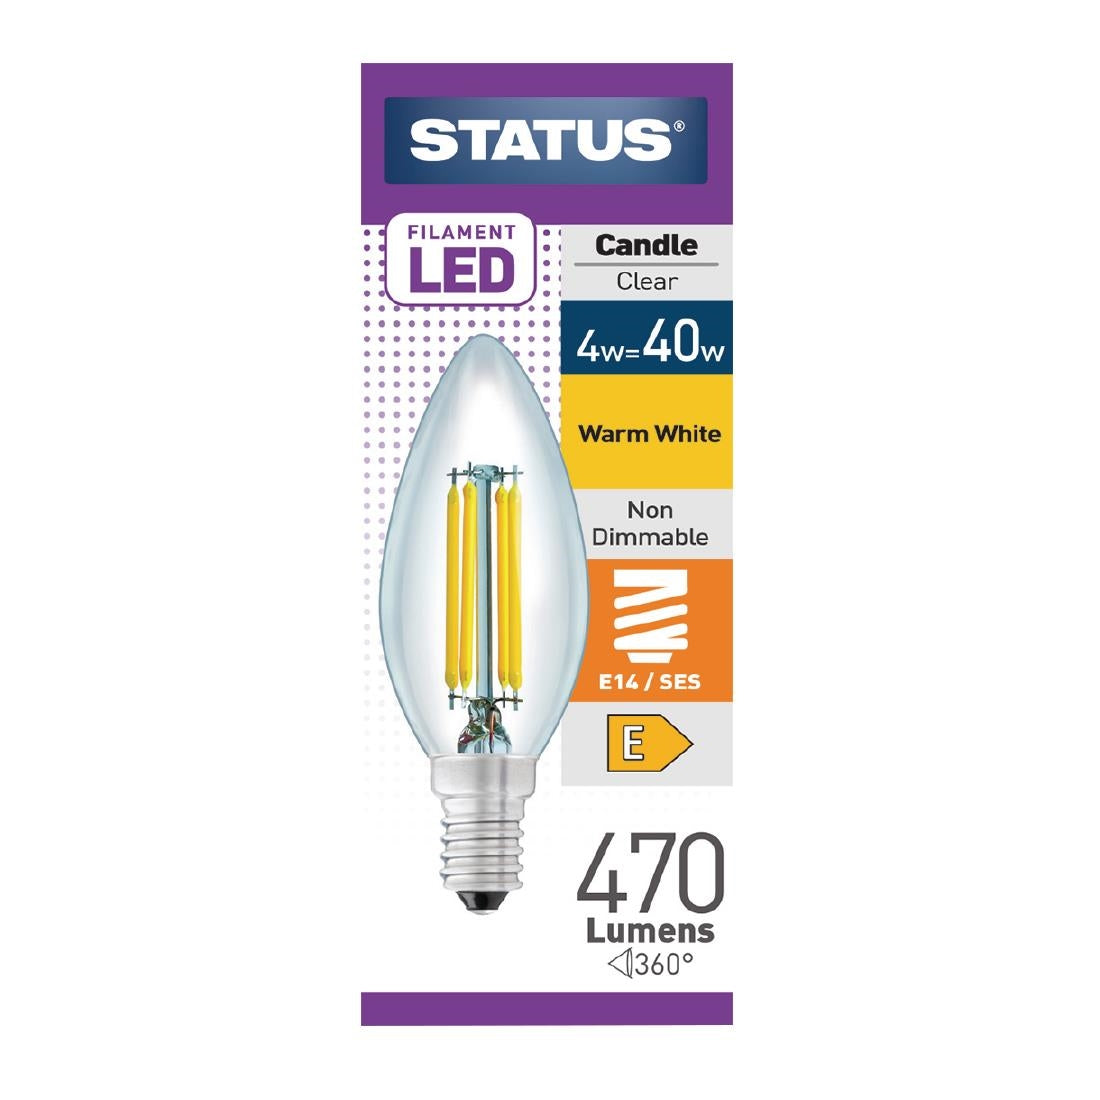 FW521 Status Filament LED Candle SES Warm White Light Bulb 4/40w JD Catering Equipment Solutions Ltd